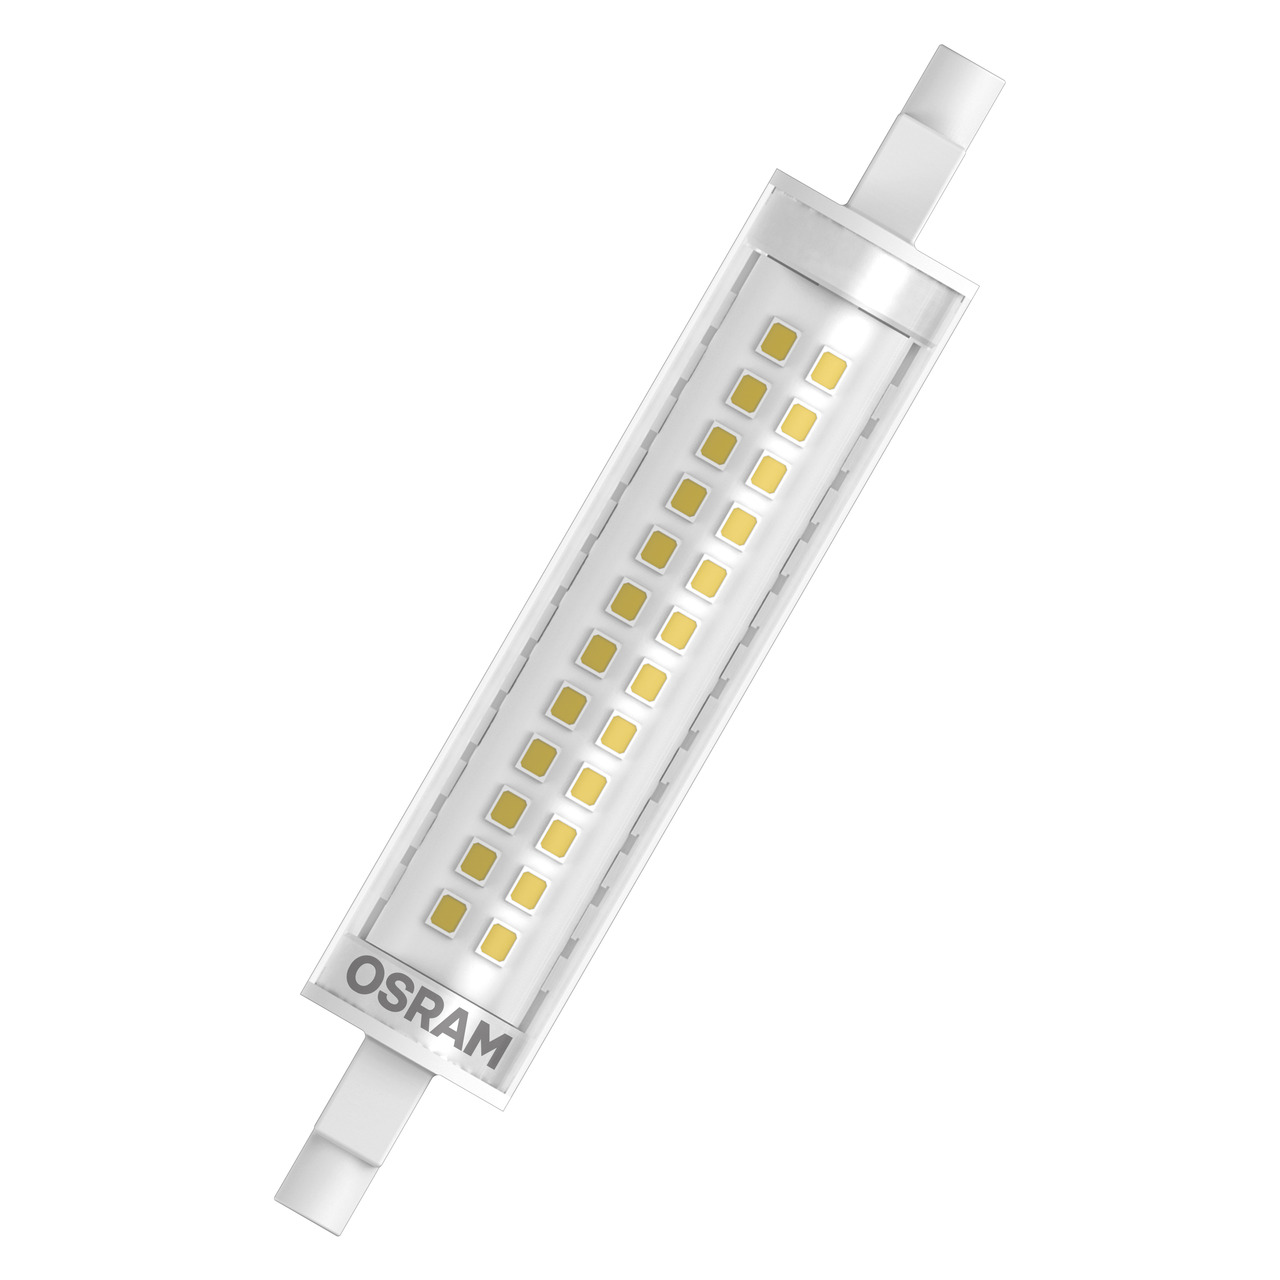 OSRAM 12-W-LED-Lampe T20- R7s- 1521 lm- warmweiss unter Beleuchtung